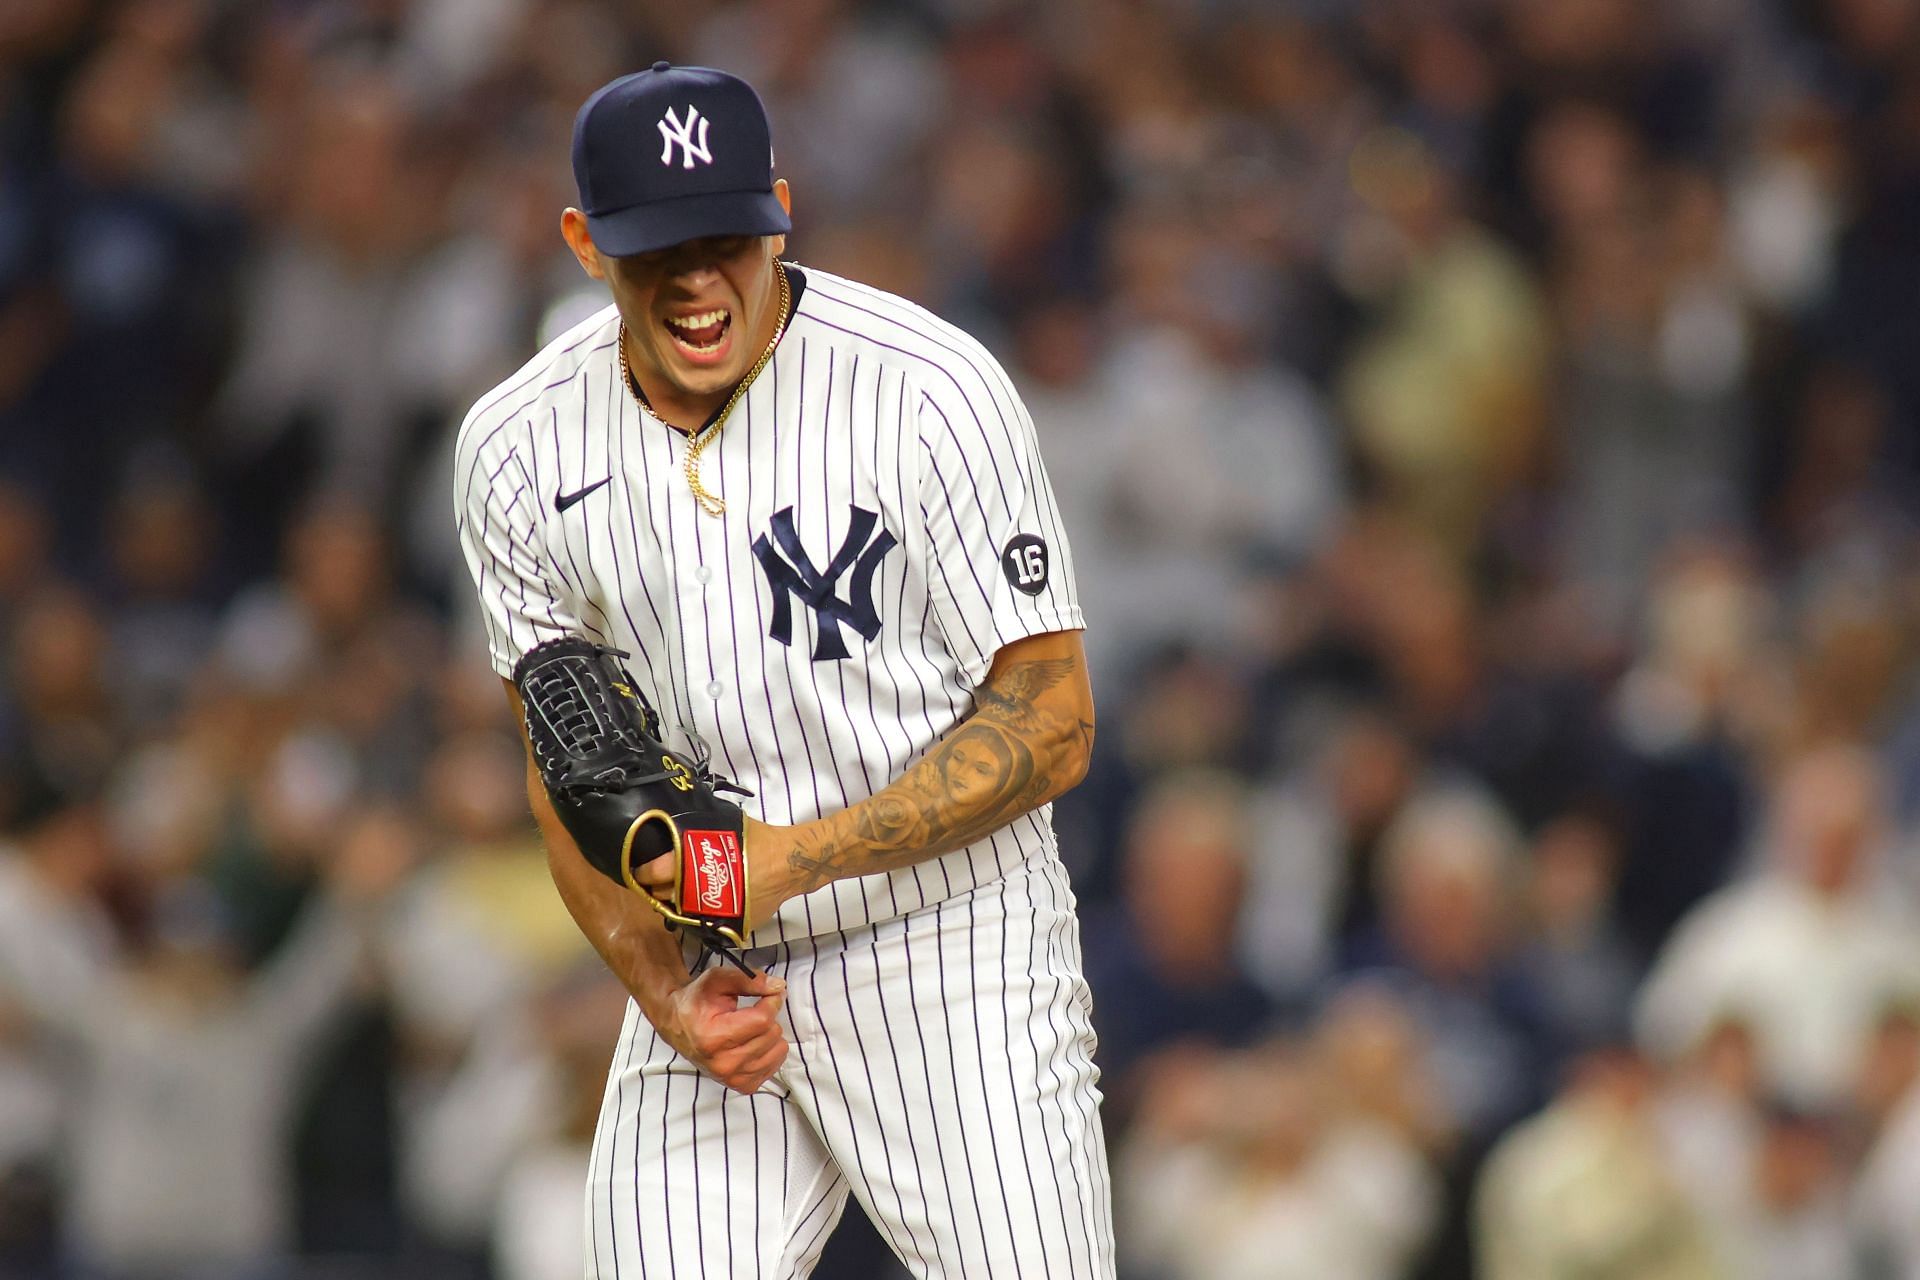 New York Yankees pitcher Jonathan Loaisiga: We want that championship;  that's what we're looking for